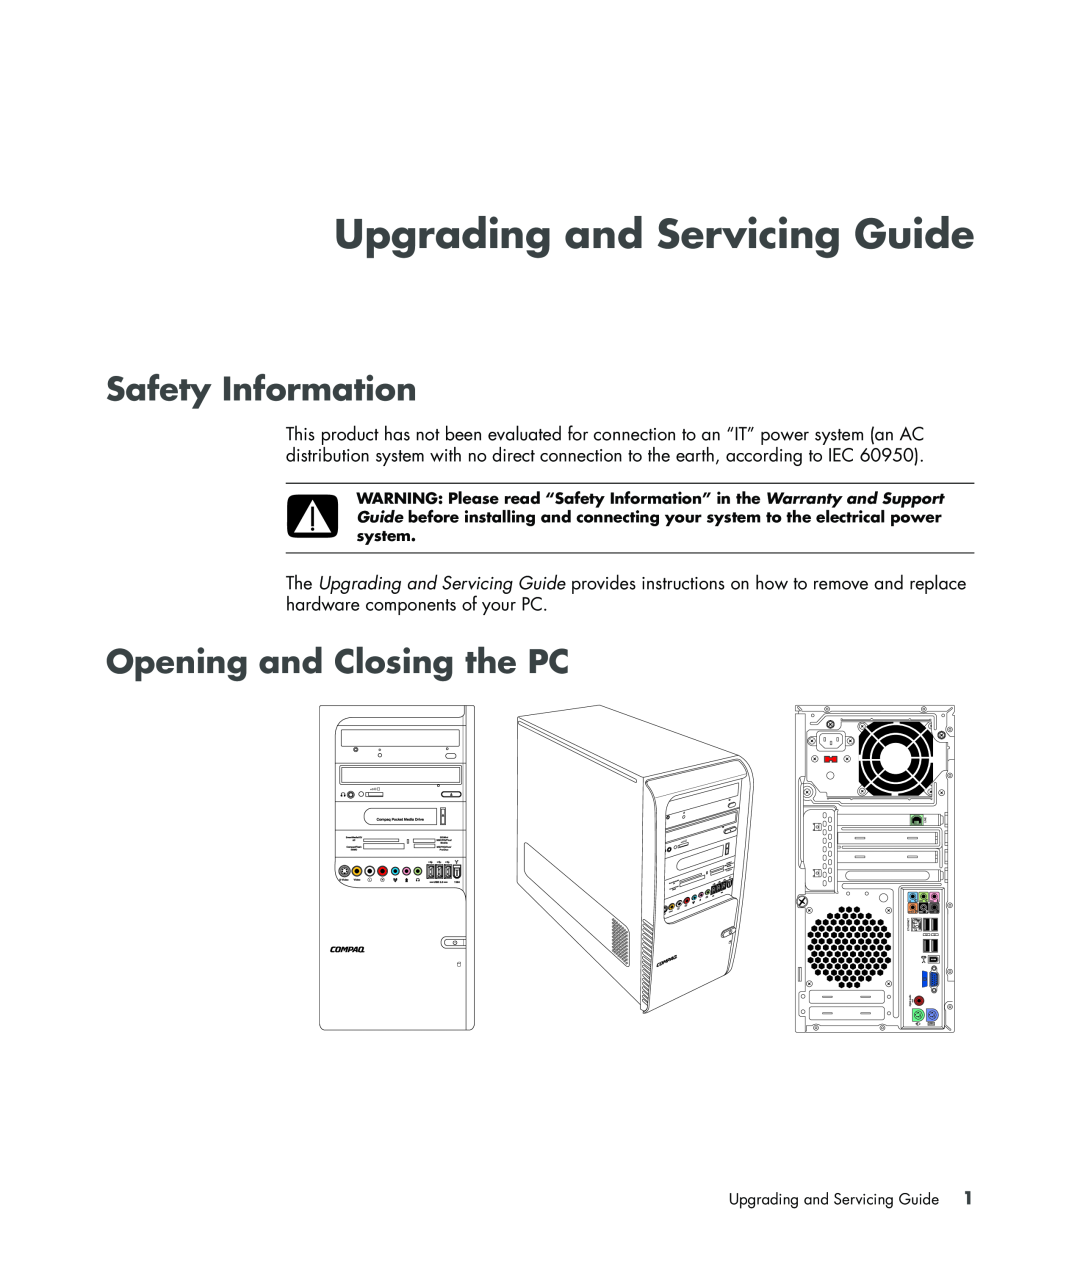 HP SR5513CF, SR5558D, SR5548F, SR5518F, SR5608F Upgrading and Servicing Guide, Safety Information, Opening and Closing the PC 